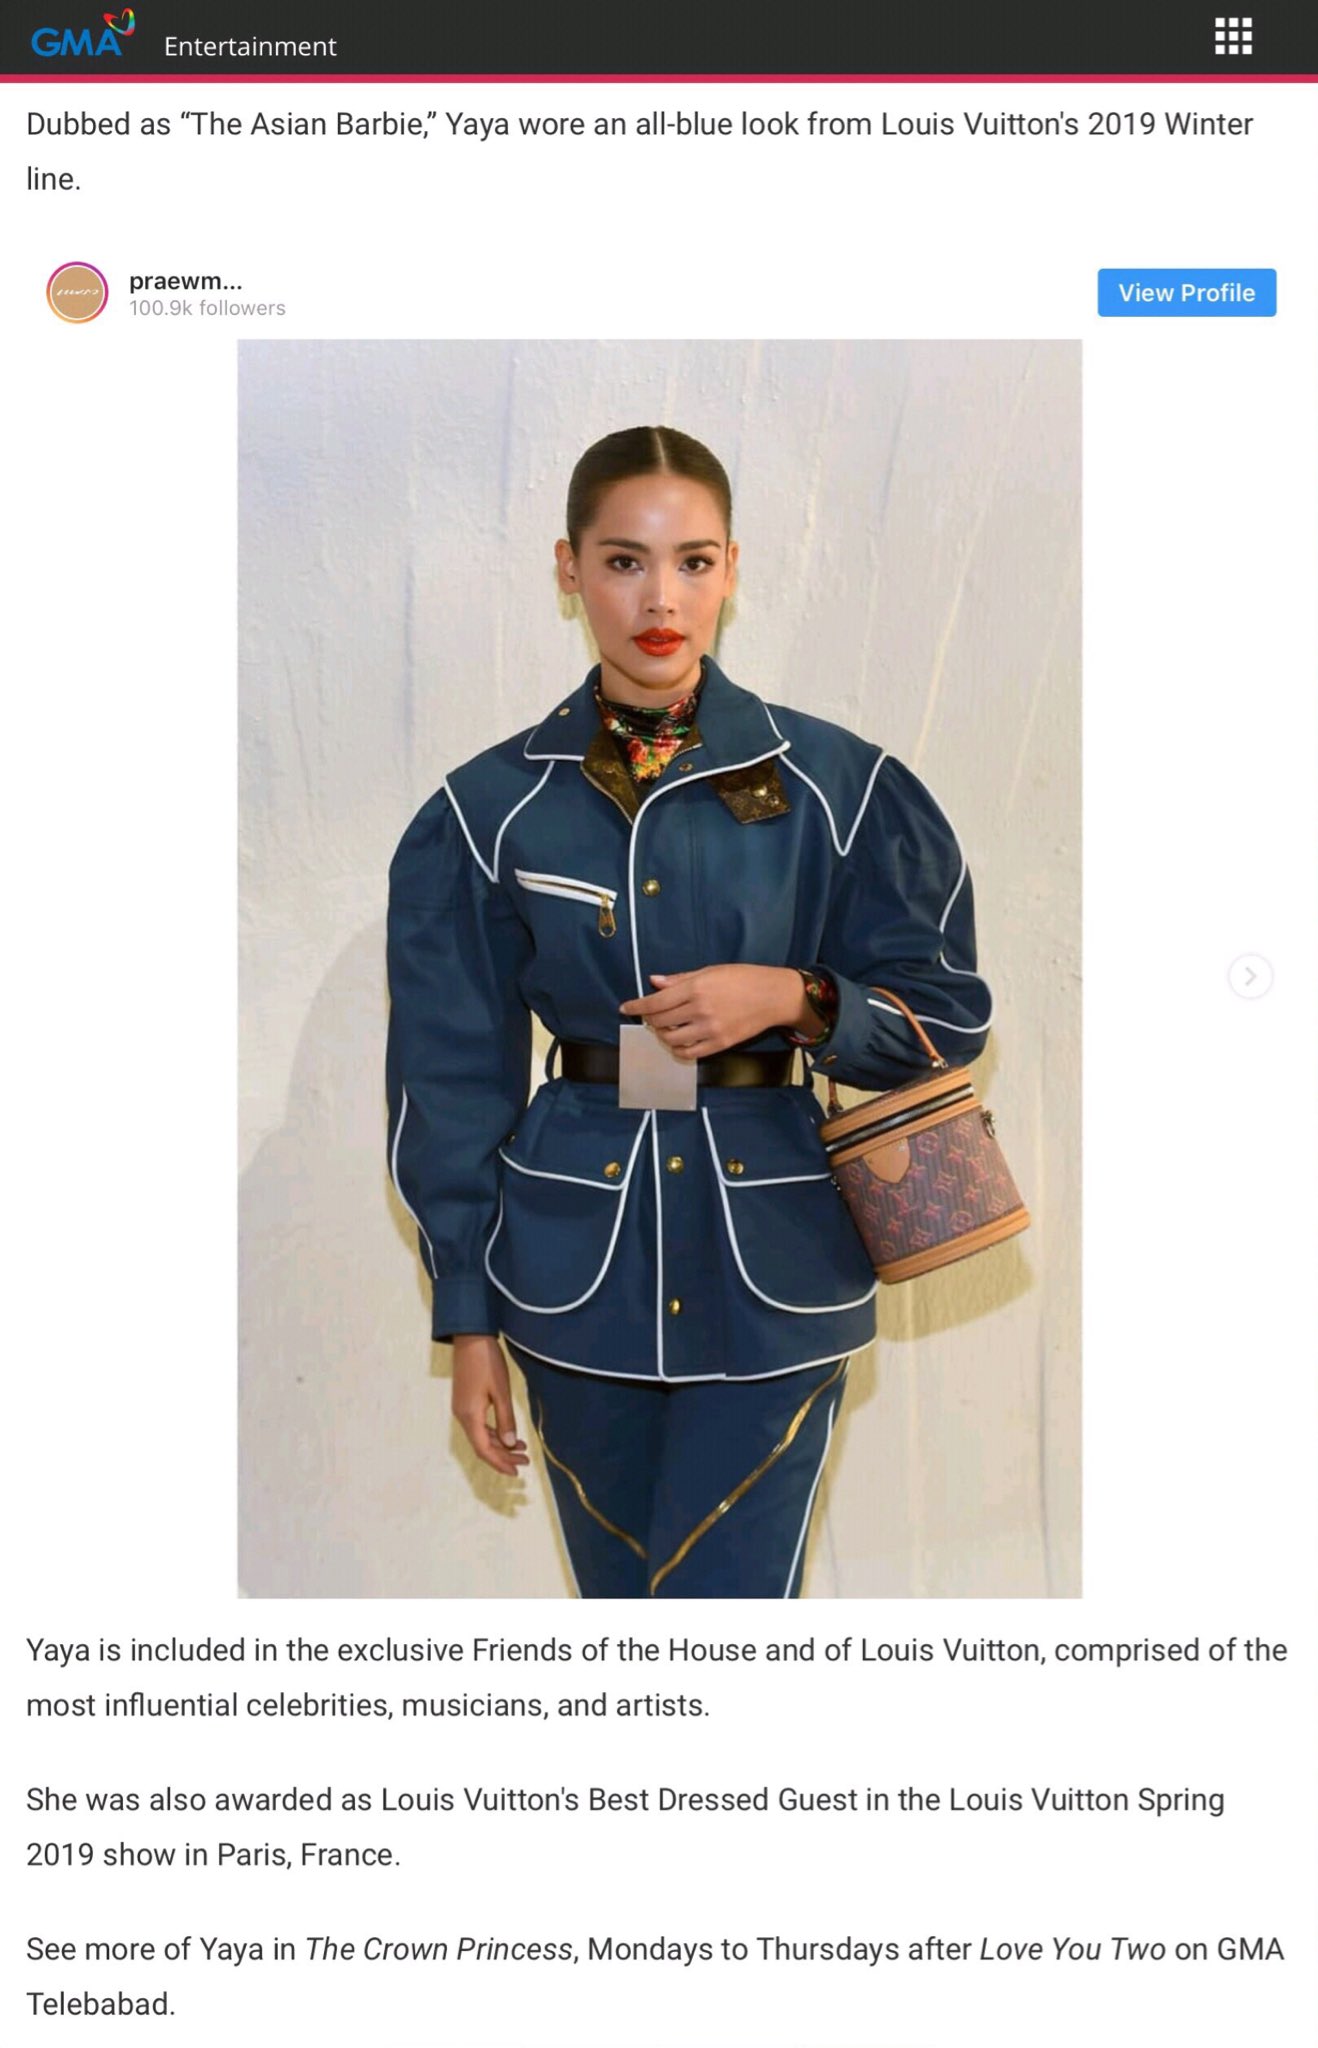 Urassaya to attend Louis Vuitton event as Friend of the House in